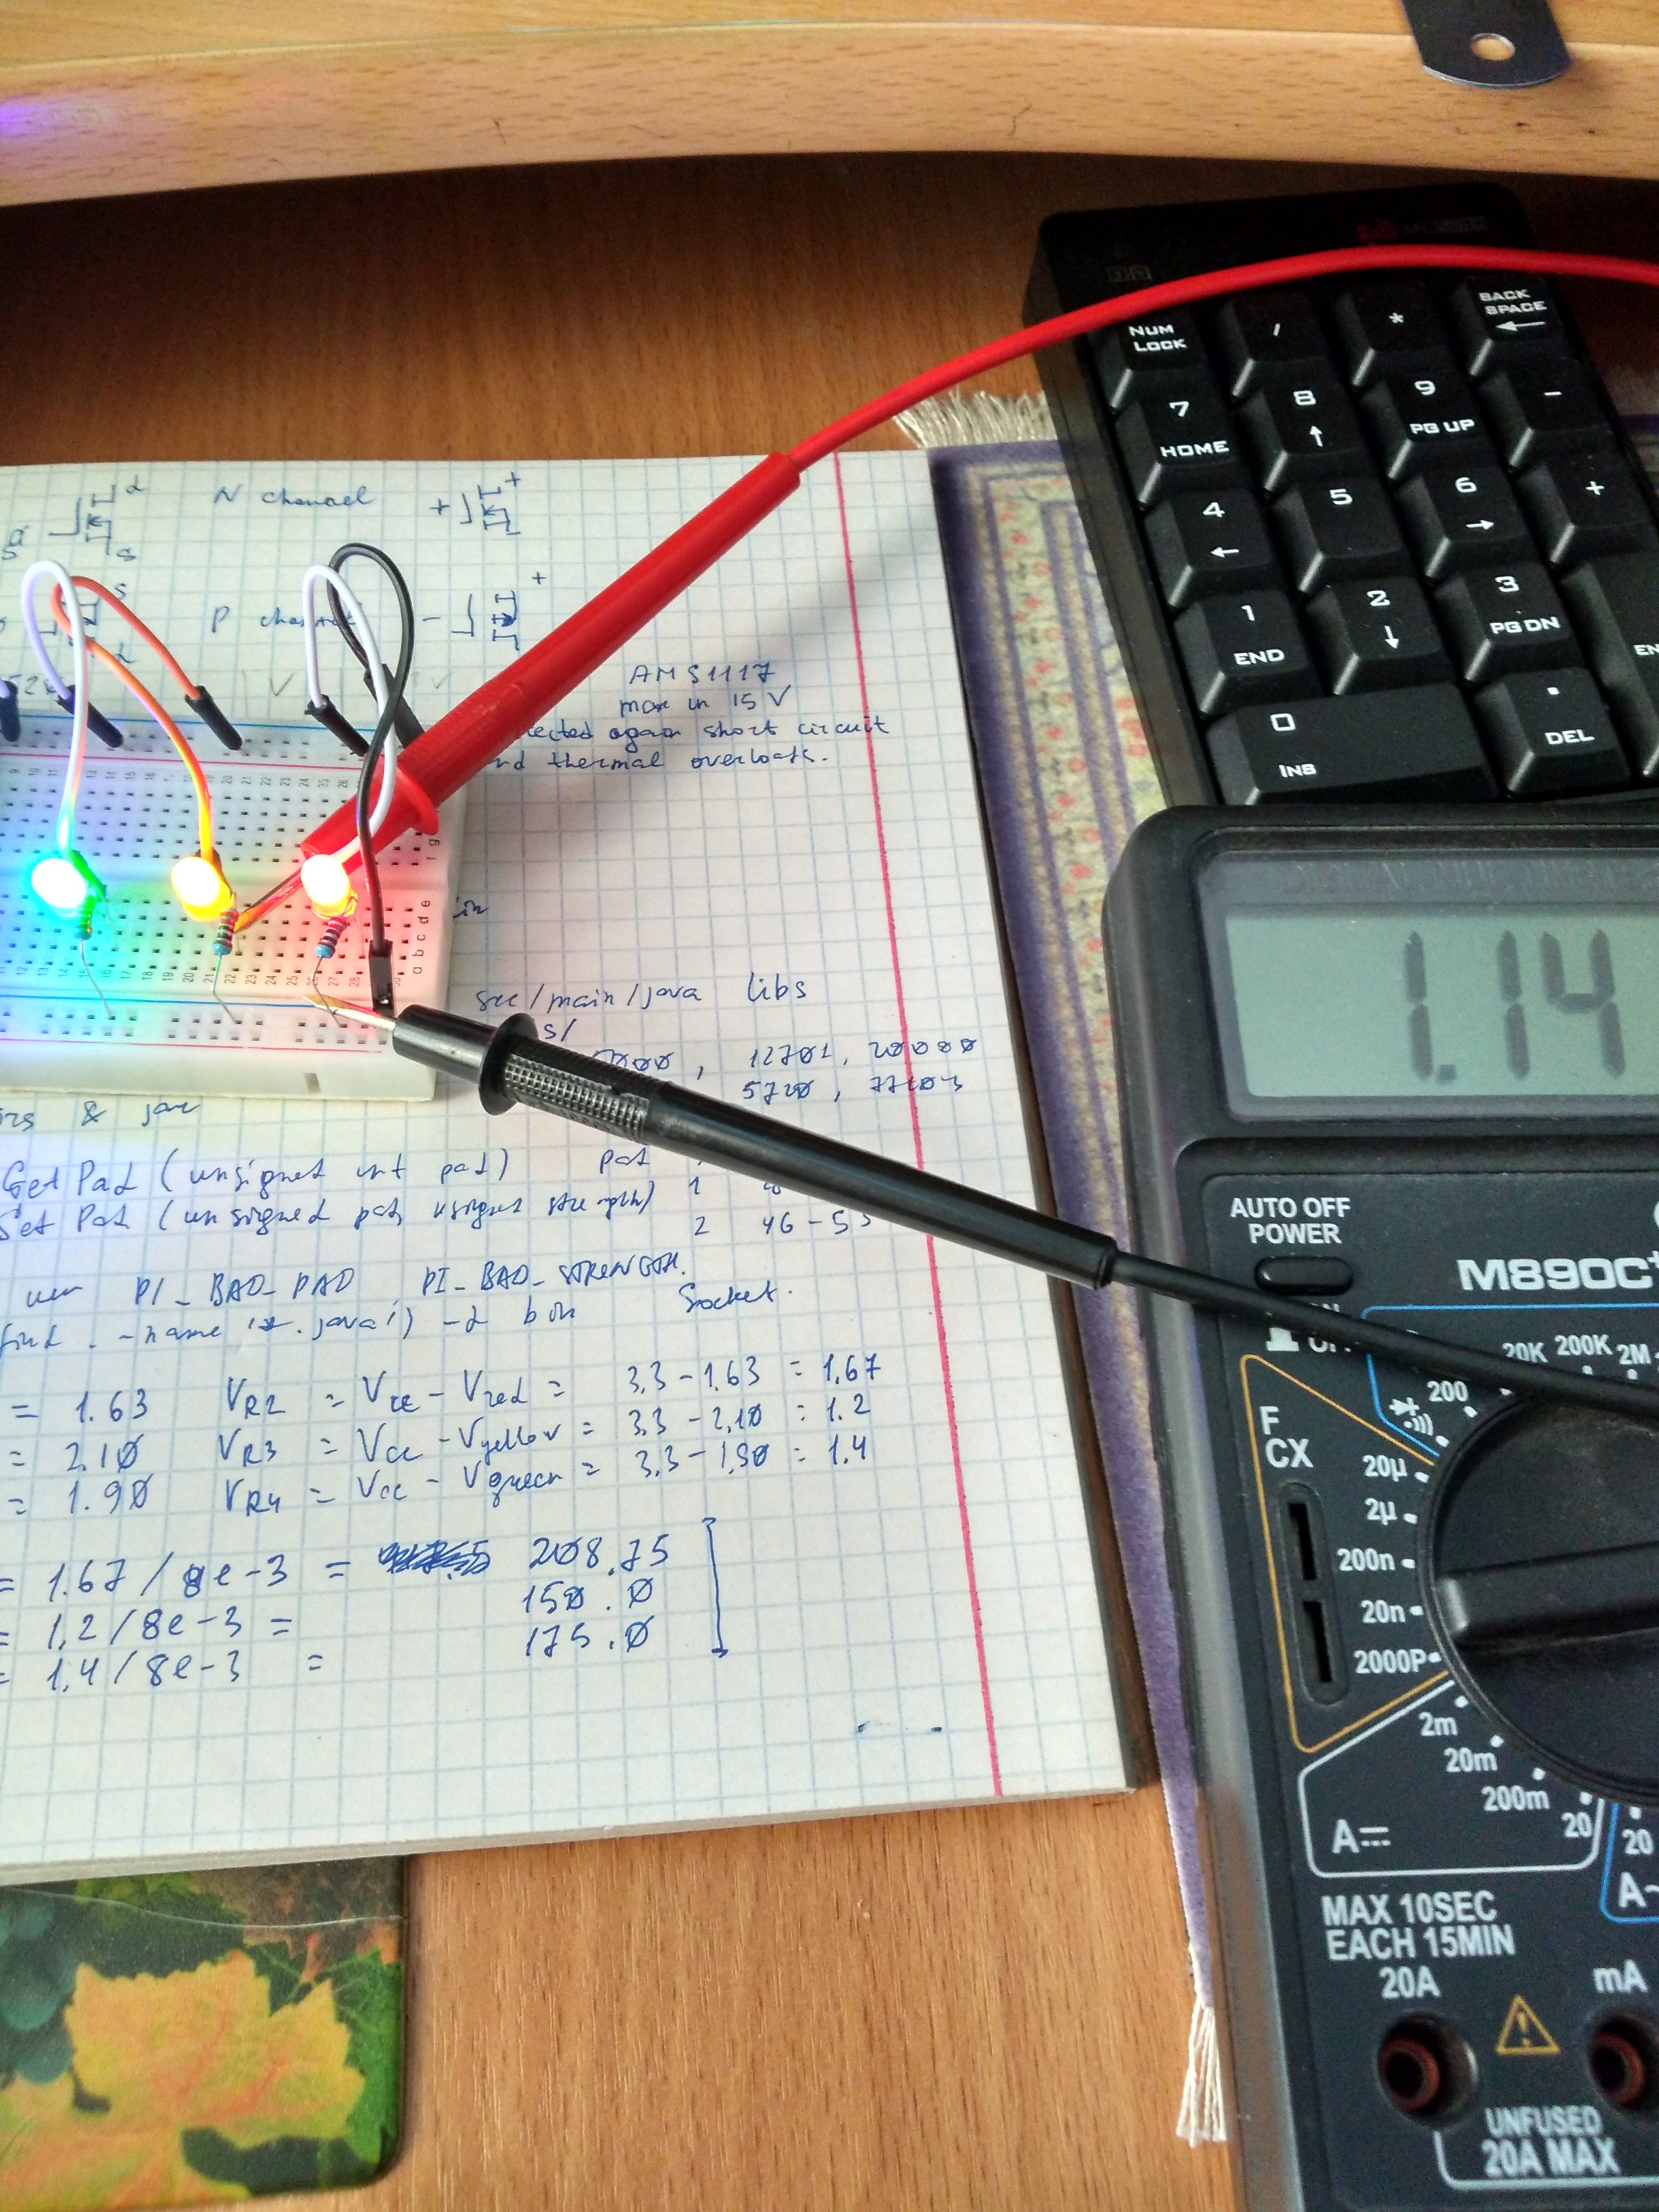 Voltage on the yellow LED